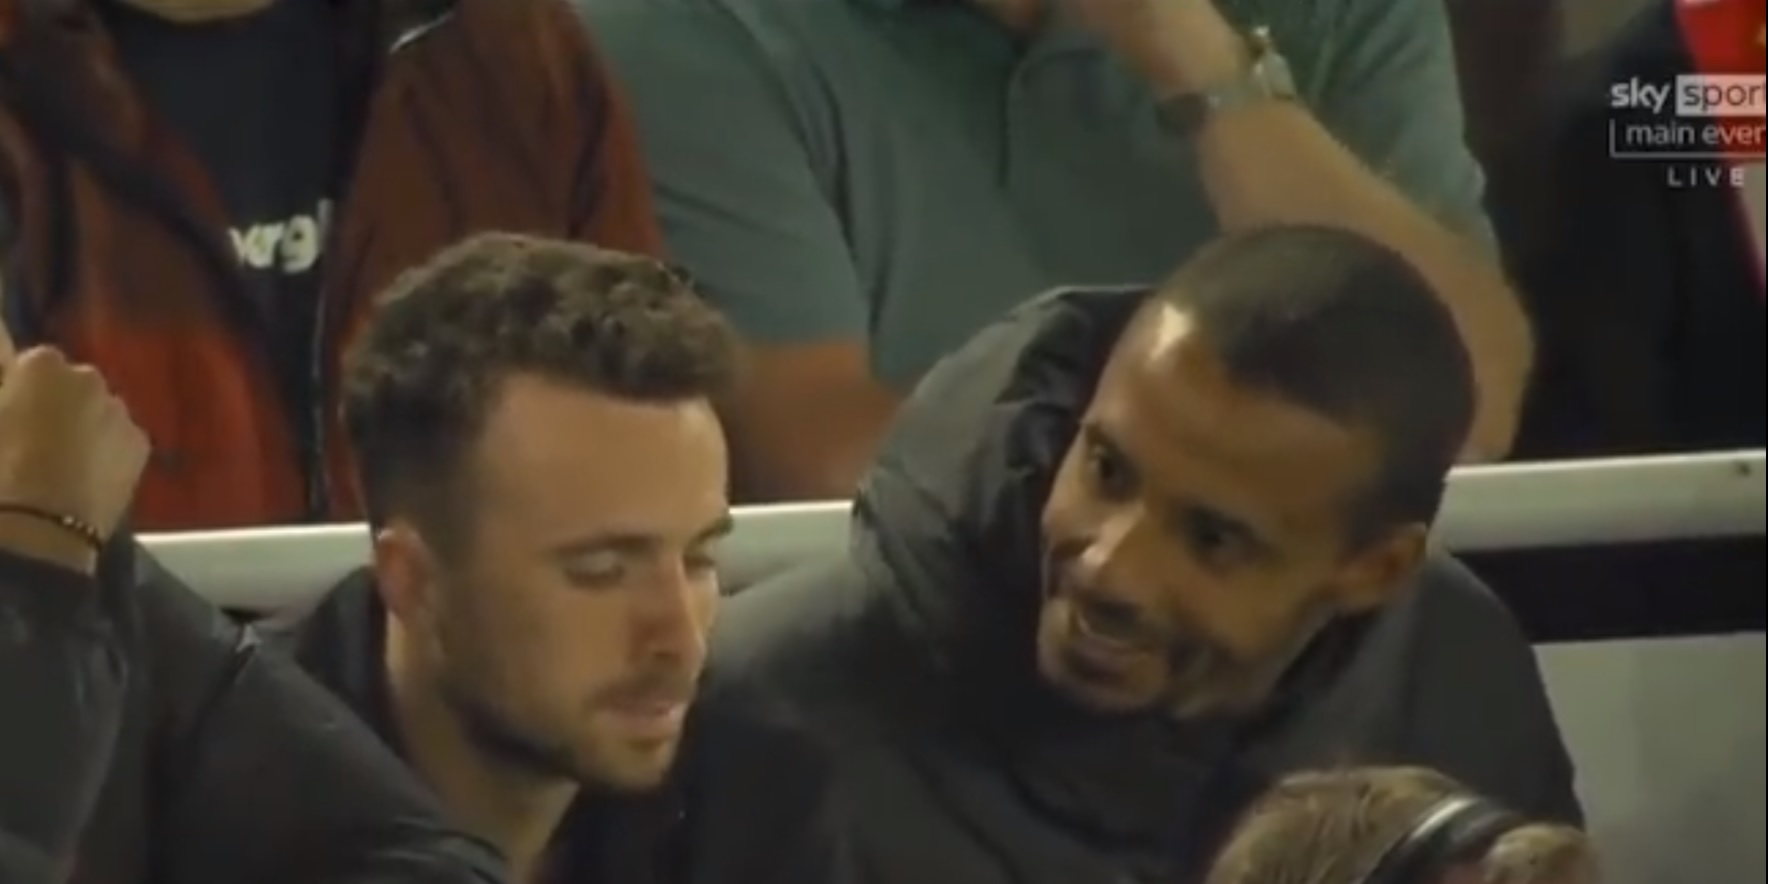 (Video) Diogo Jota appears to tell LFC teammate to ‘shut up’ on the bench during Palace clash